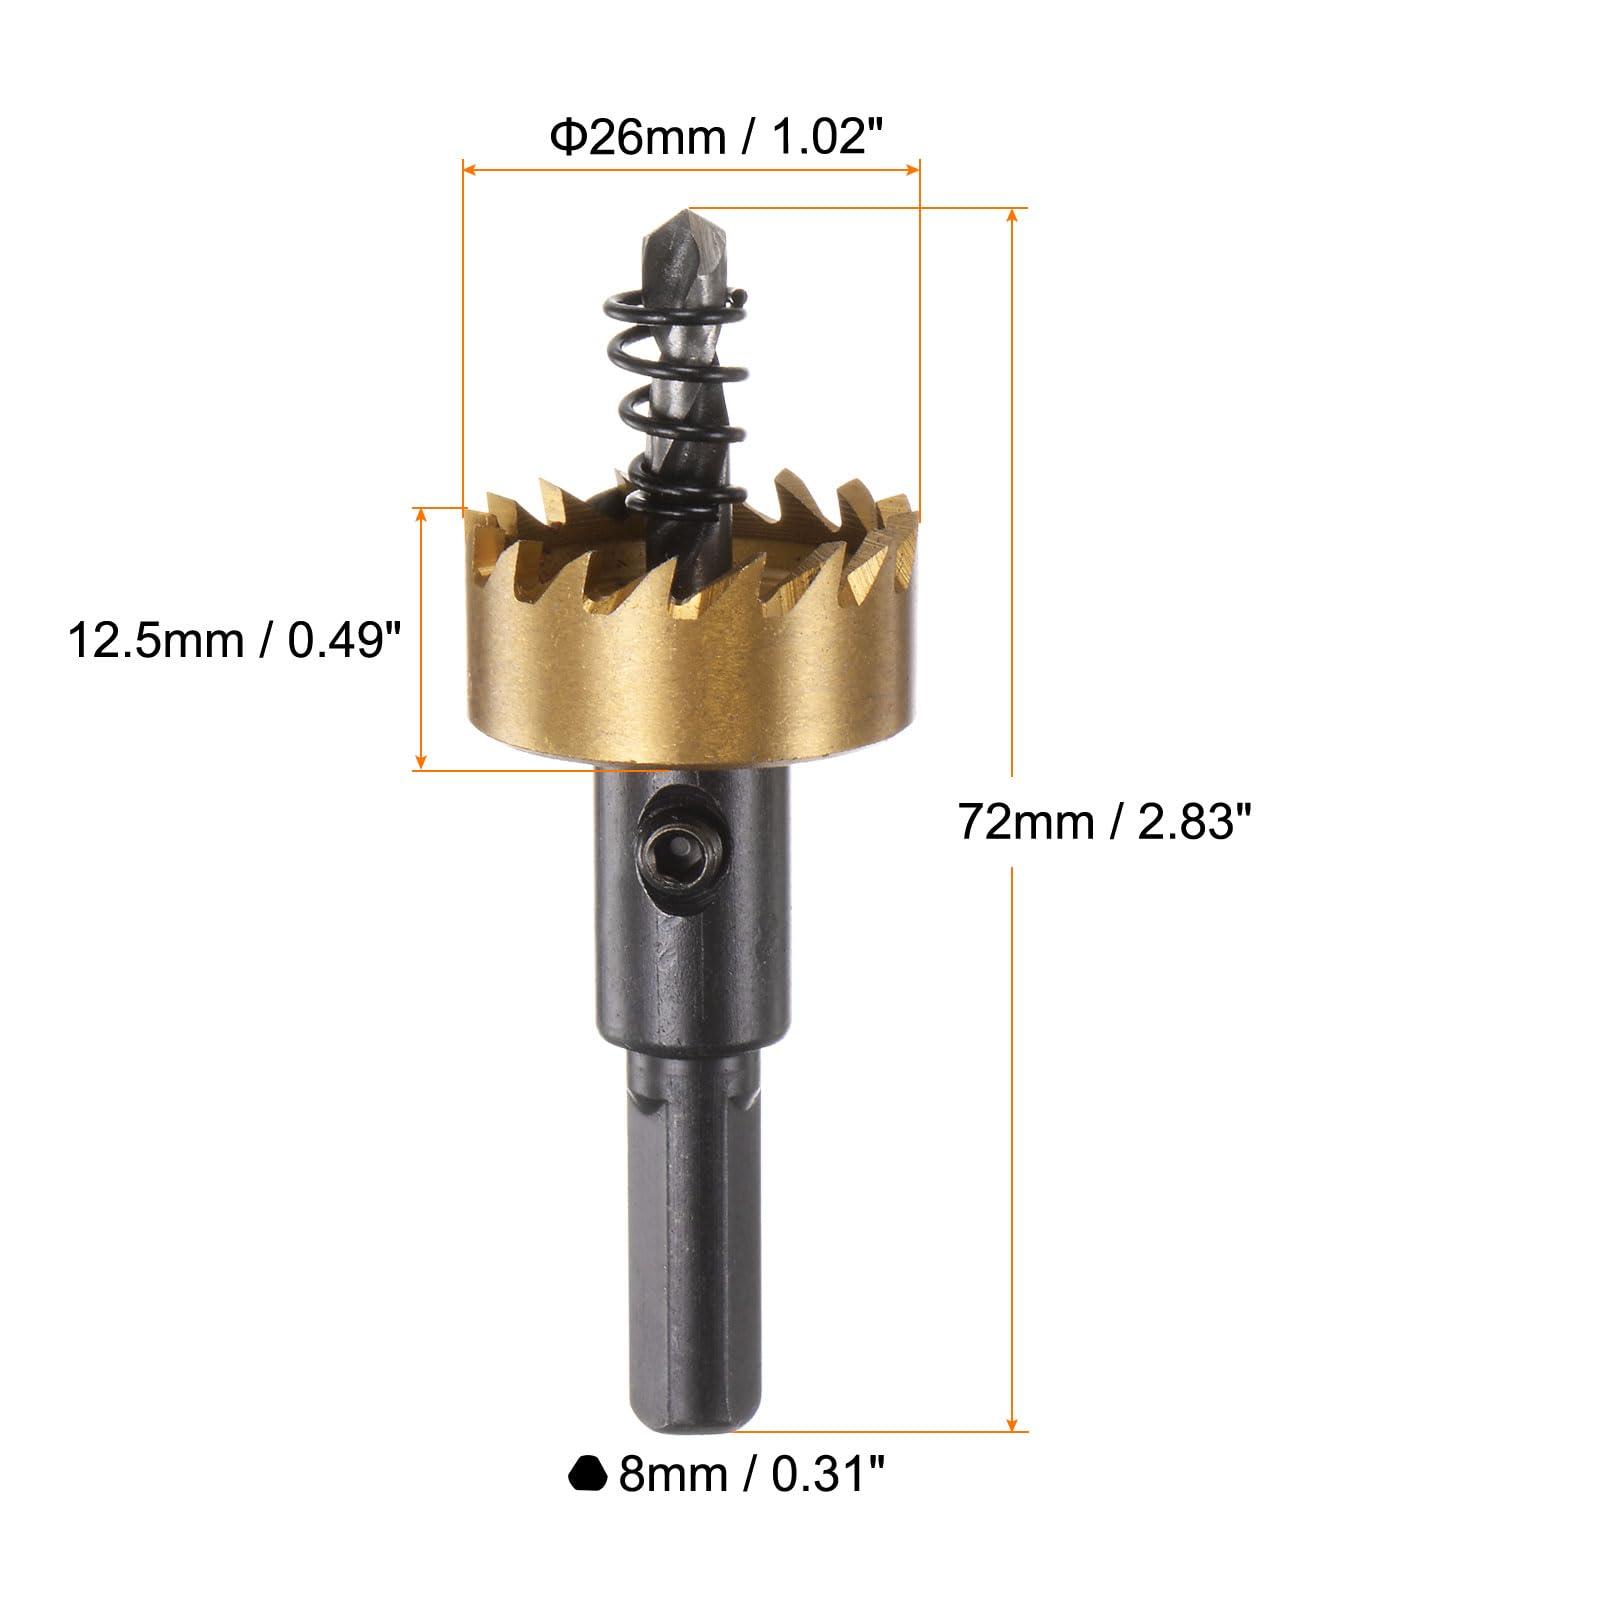 sourcing map 2pcs Hole Saws 26mm (1-2/85") M35 HSS (High Speed Steel) Titanium Coated Drill Bits Cutters Openers for Stainless Steel Aluminum Alloy Metal Wood Plastic 1